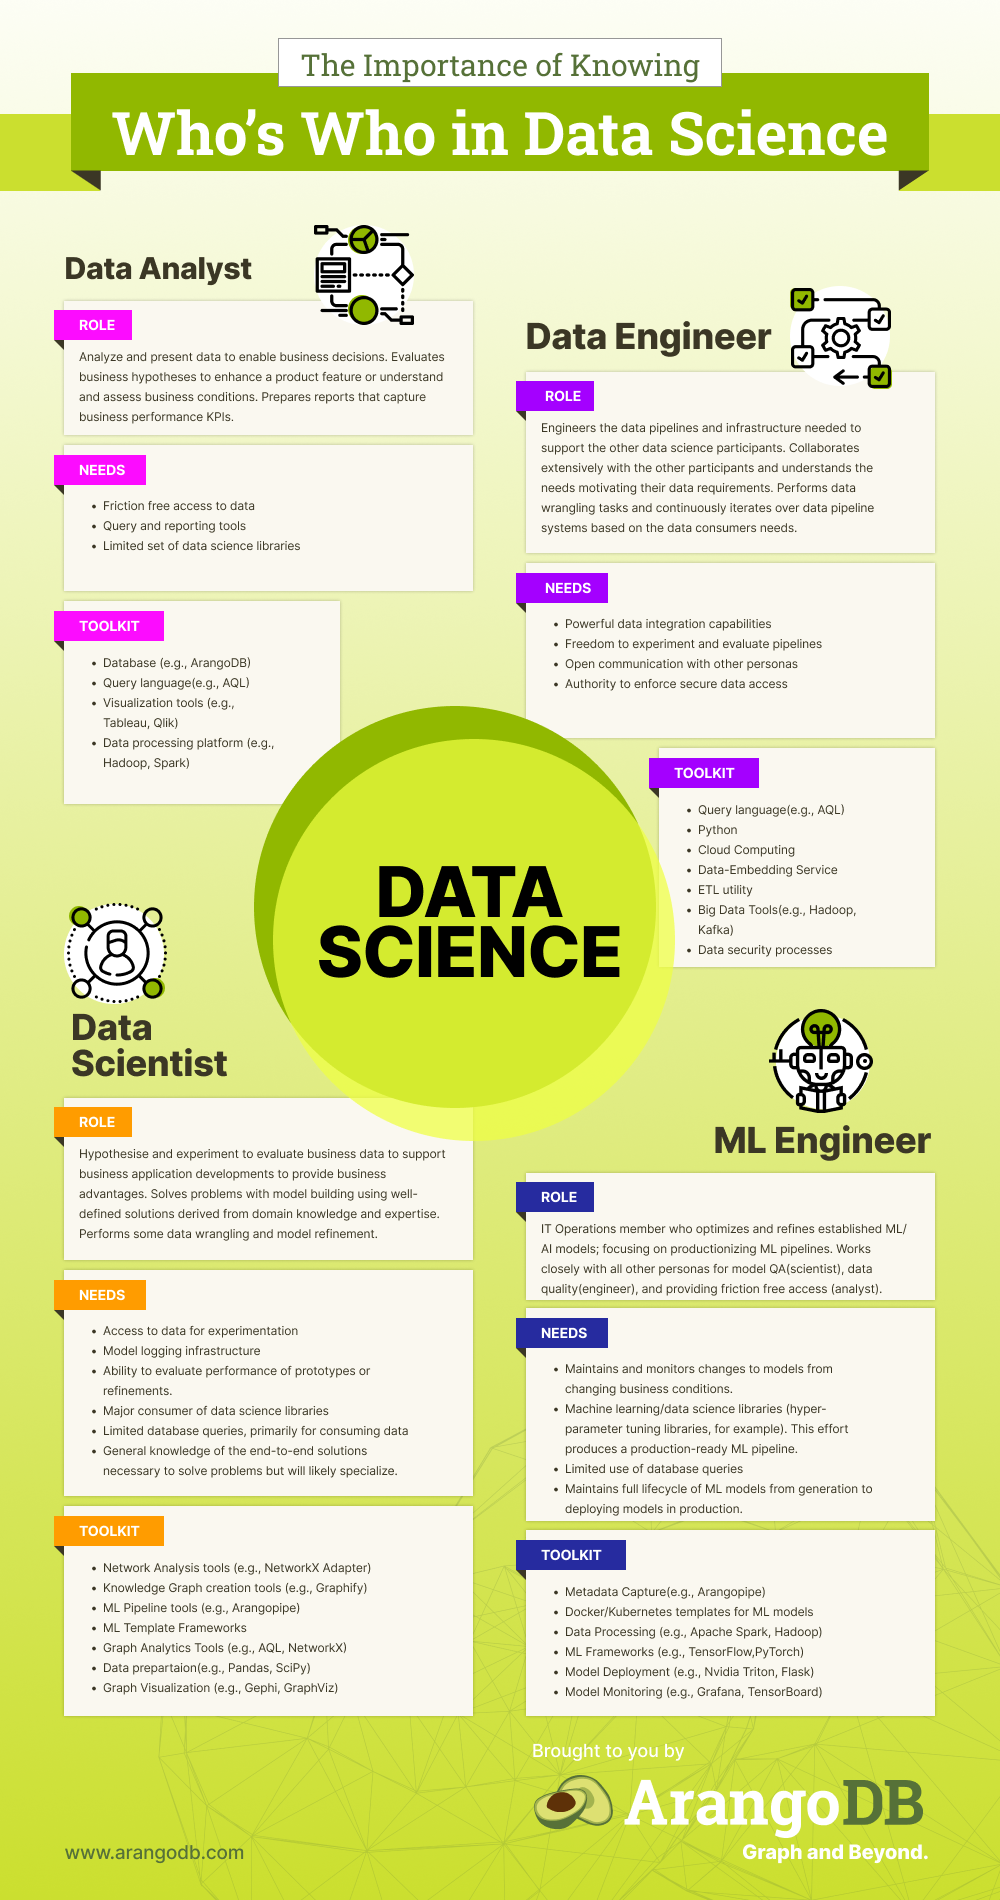 Who’s Who in Data Science